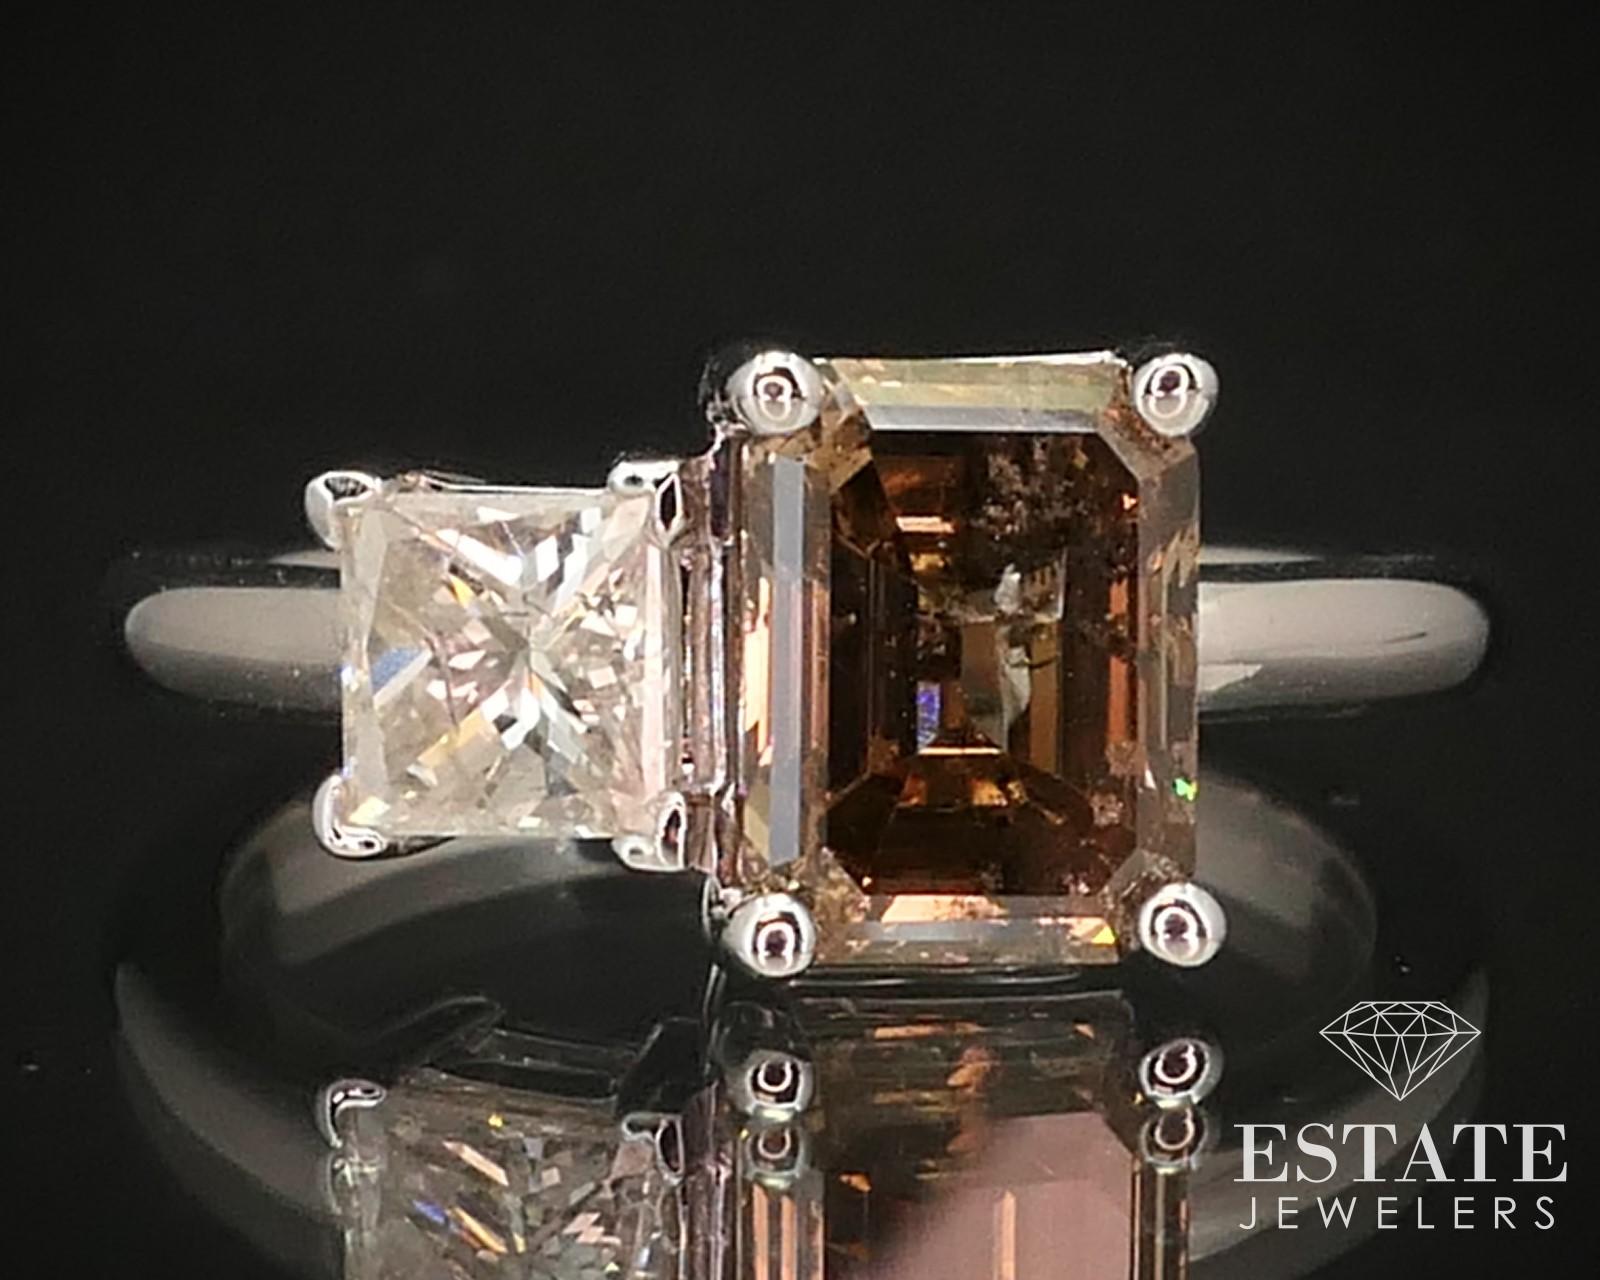 Beautiful custom made band with a 2.02ct emerald cut champagne diamond on one side and a .58ct princess cut white diamond next to it. Unique and stunning combo of diamonds! I1 clarity with K color to the white diamond. 8.2mm by 6.3mm emerald cut